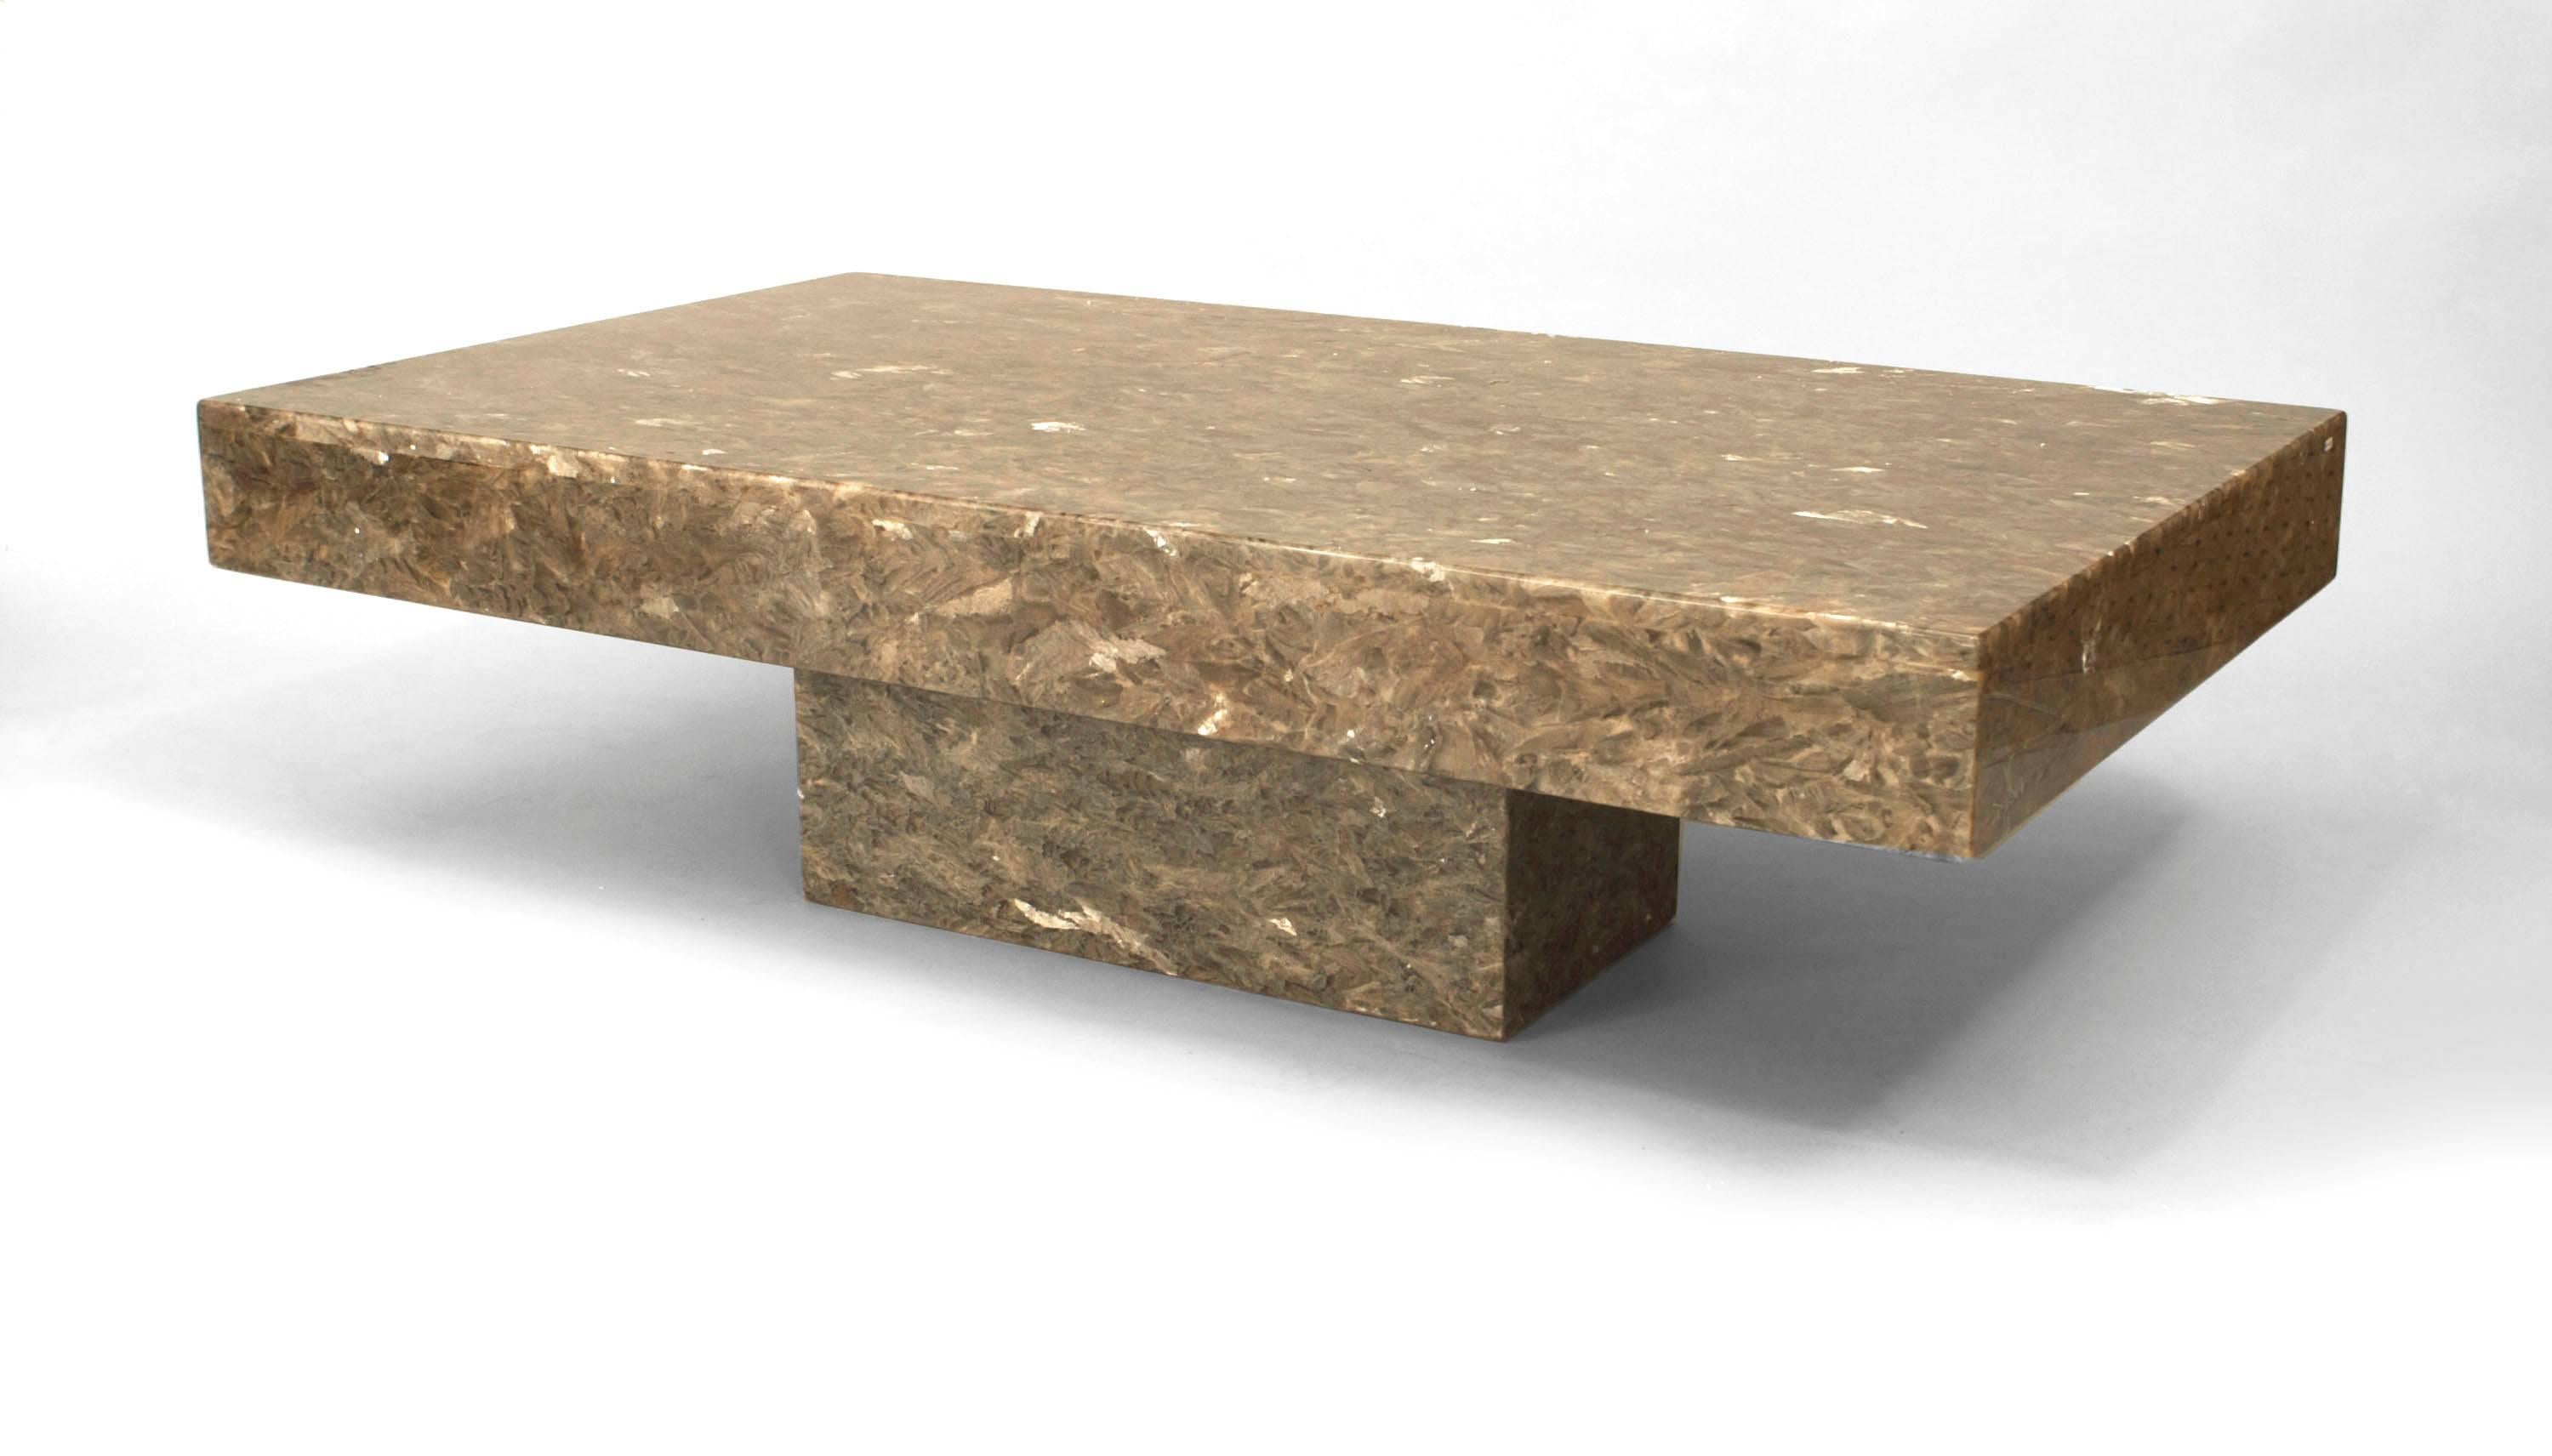 Italian Mid-Century Modern (1960s) rectangular beige mica and resin coffee table resting on a solid base.
